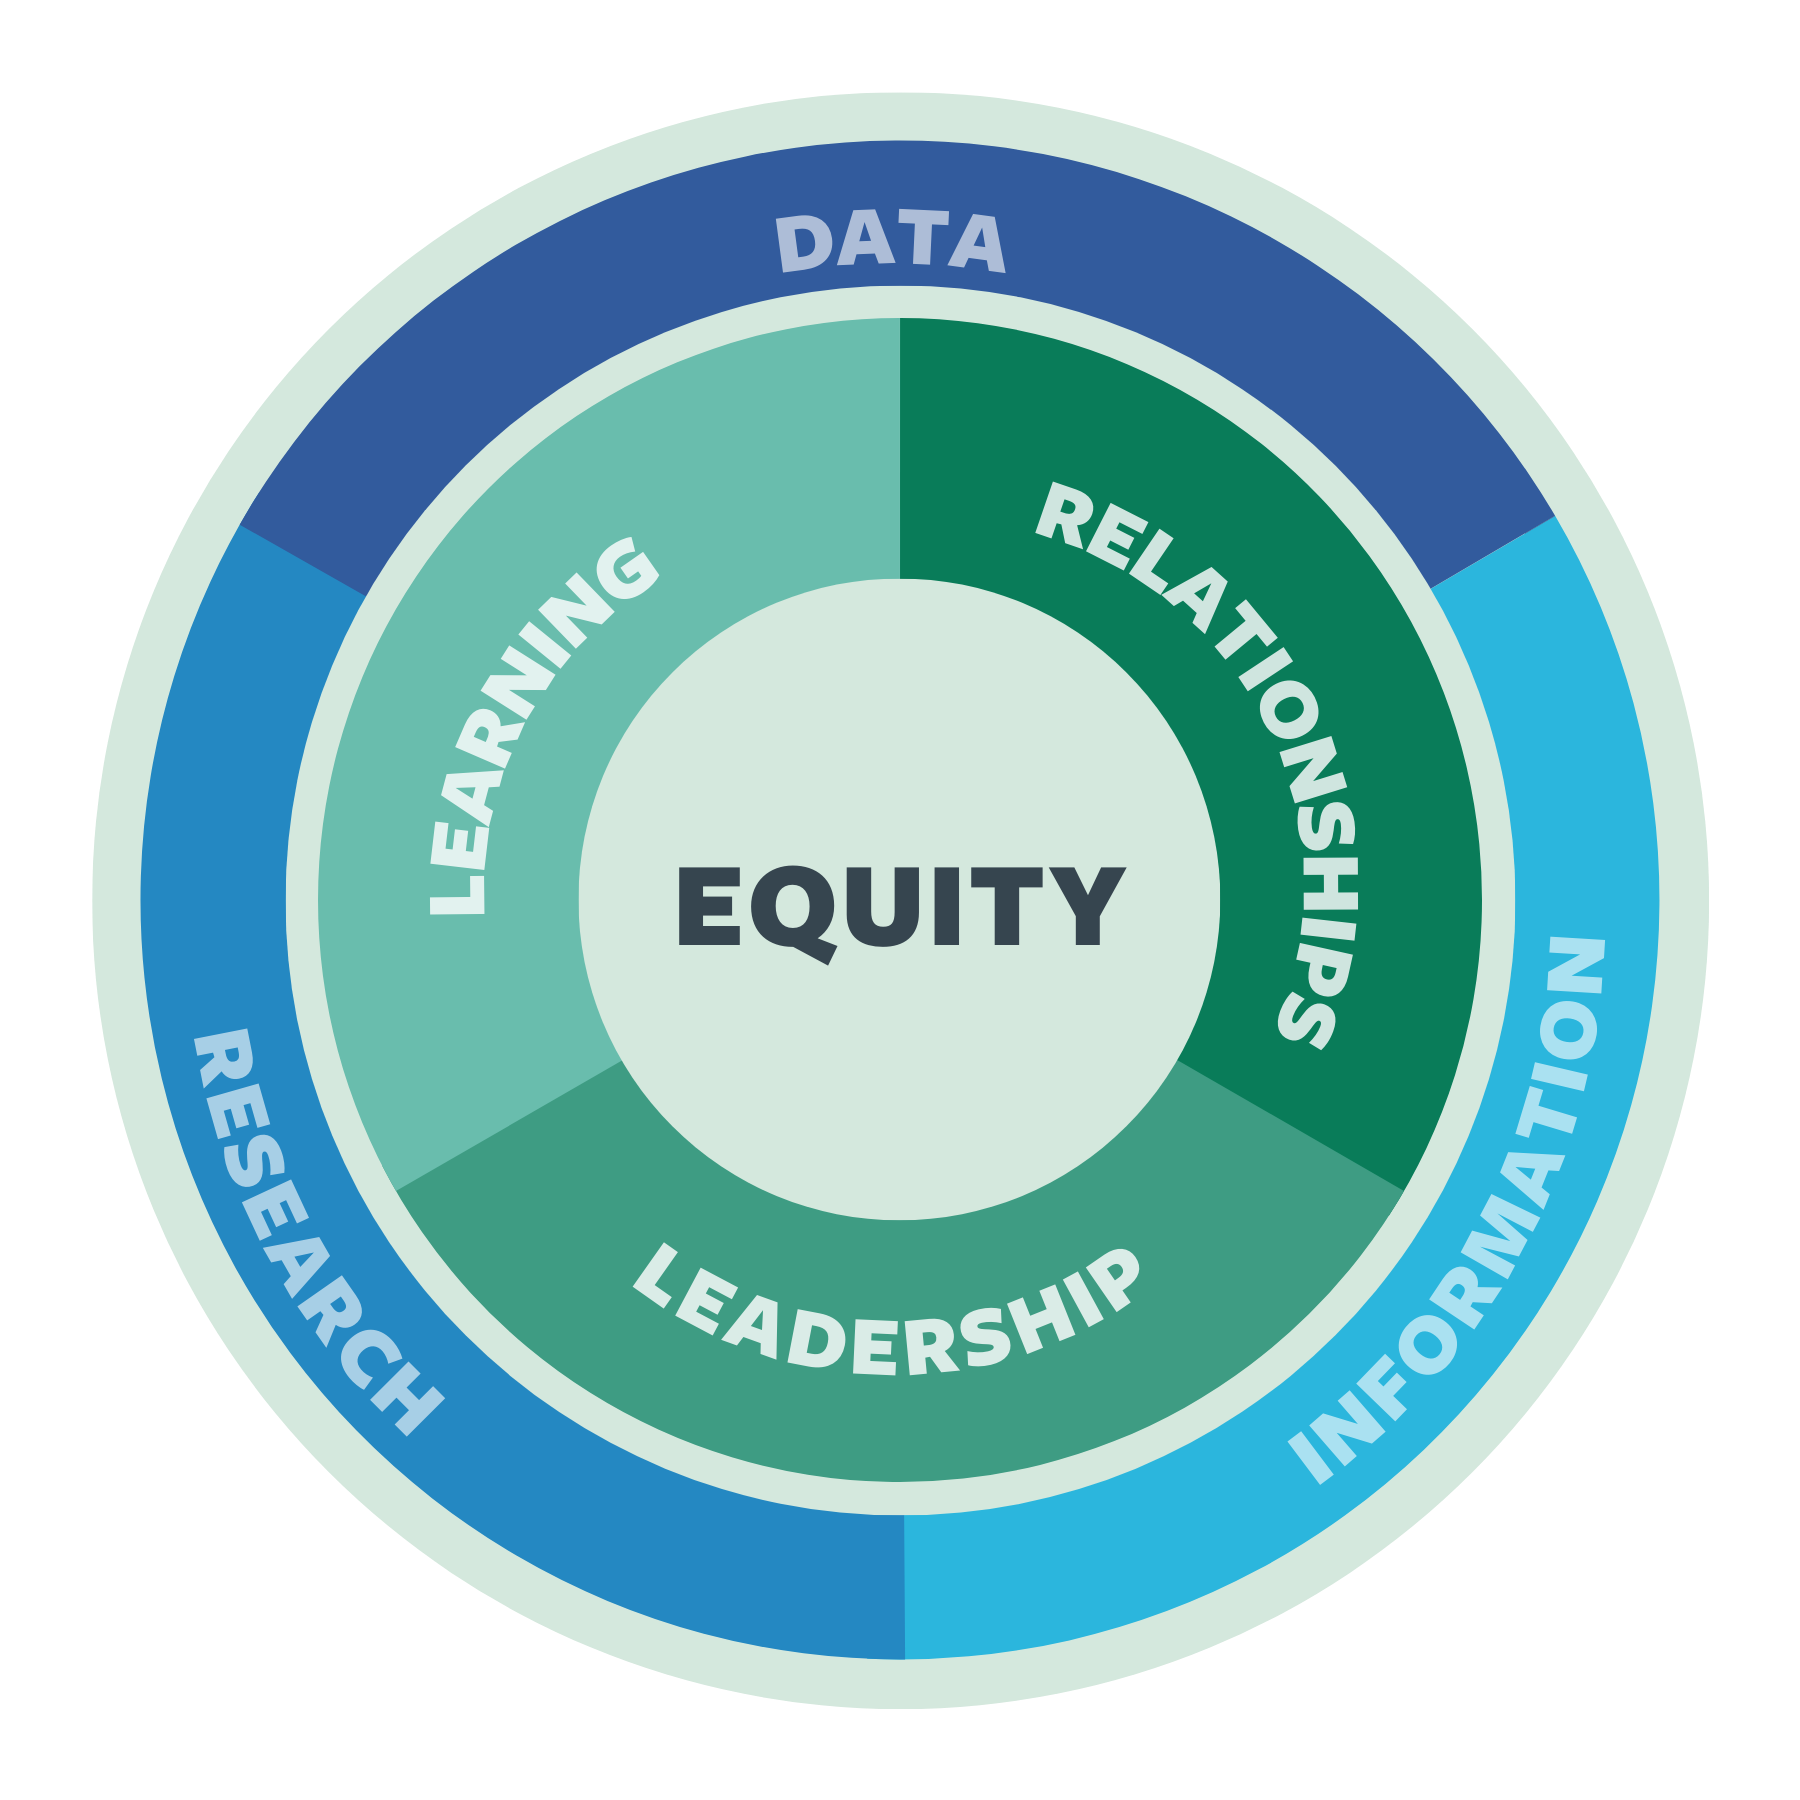 Concentric circles with Equity in the center, Learning, Relationships, and Leadership in the middle, and Data, Research, and Information on the outer layer